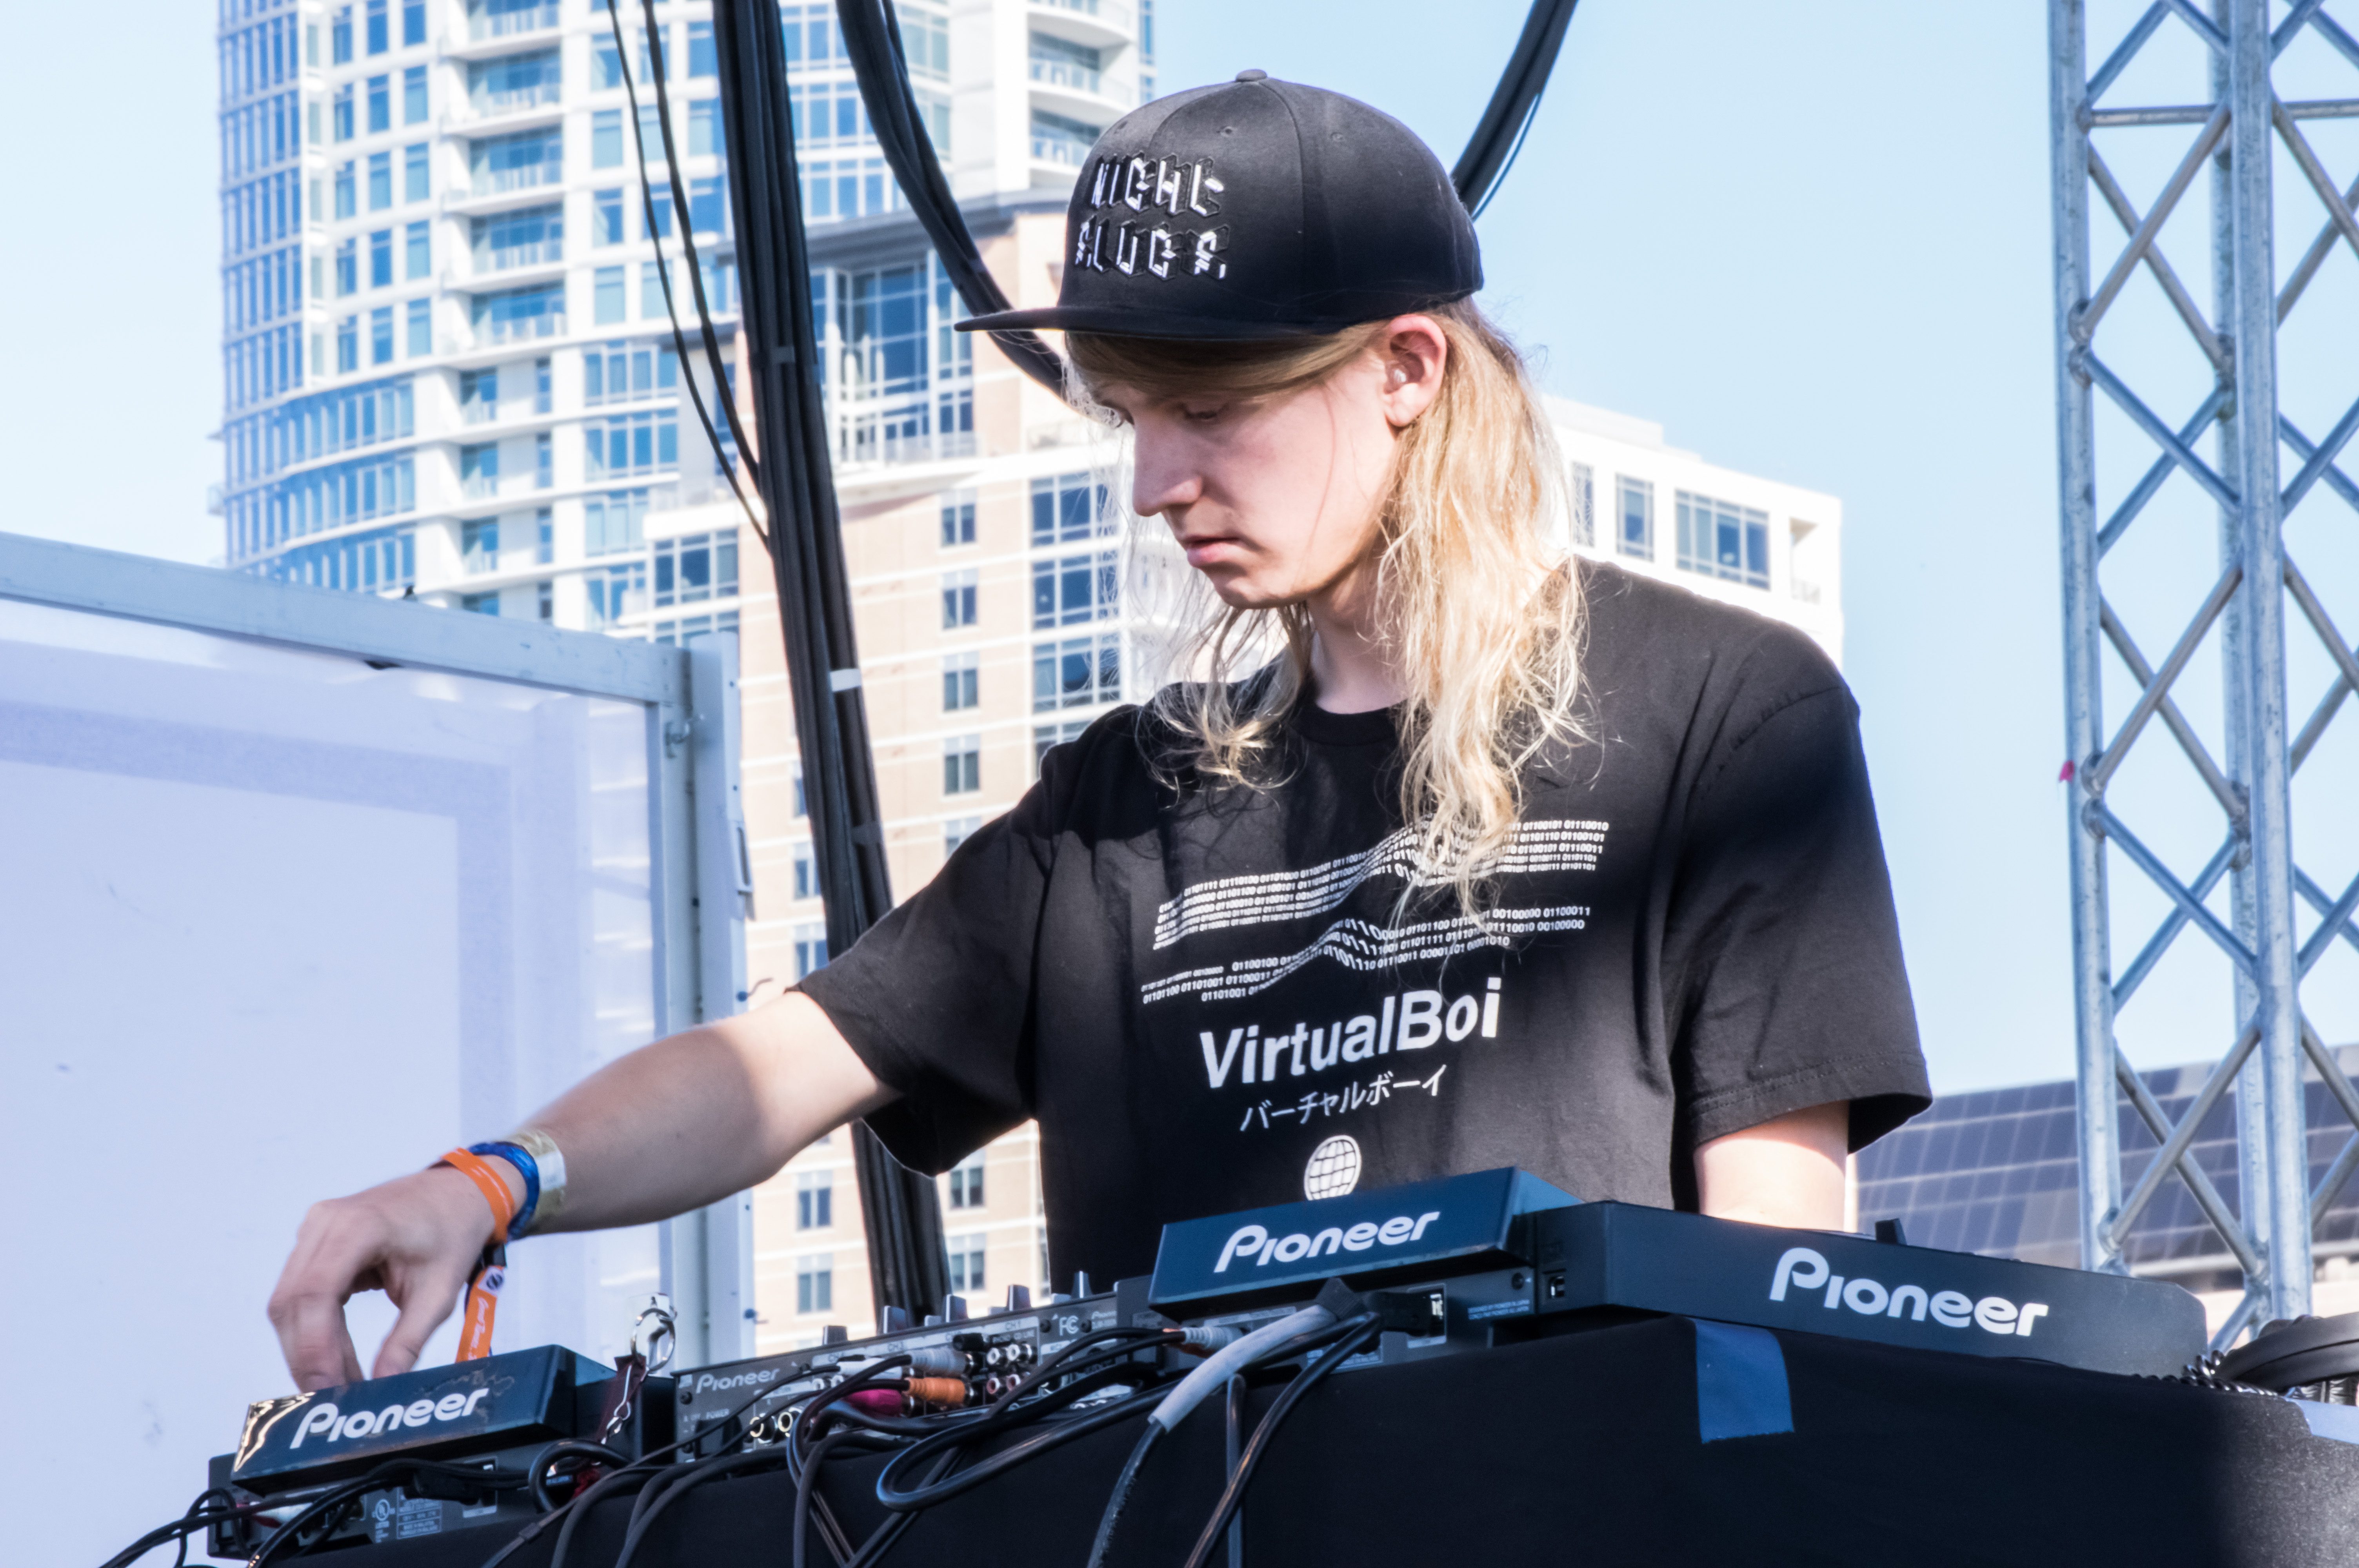 Cashmere Cat Announces New Album Princess Catgirl For September 2019 Release Debuts New CGI Animated Video For "Emotions"